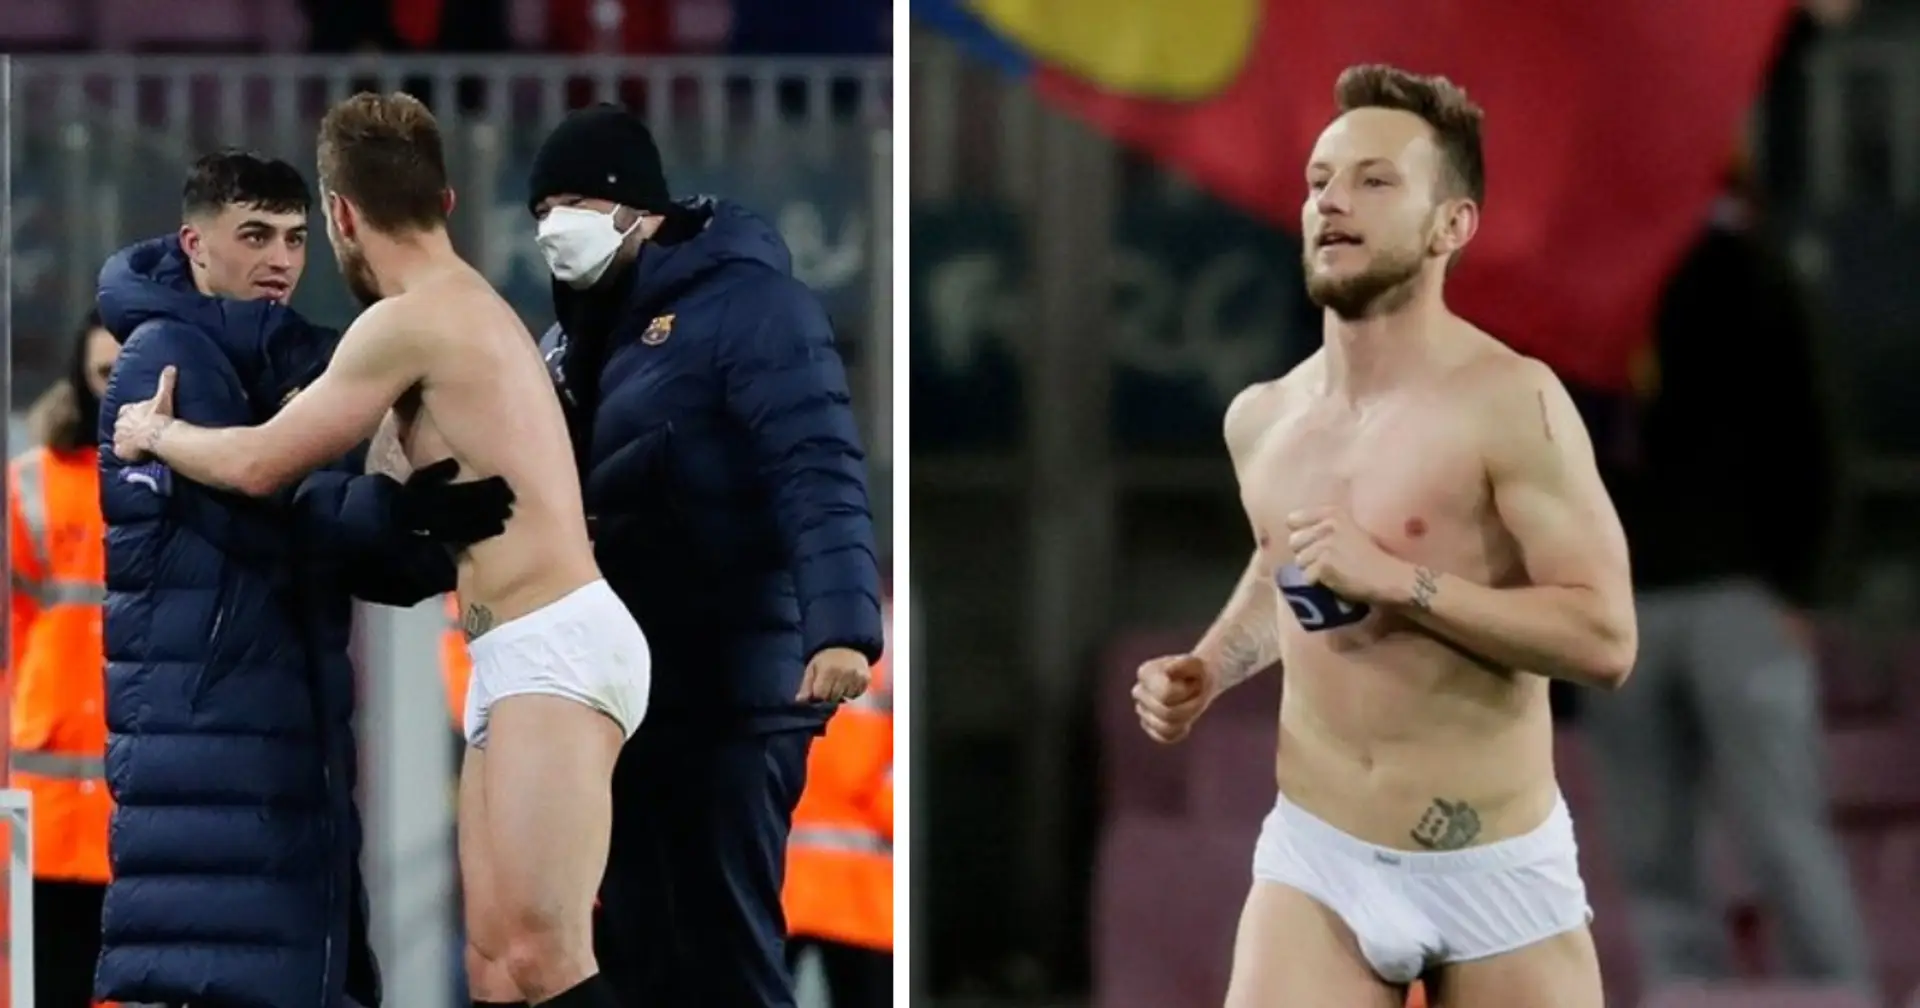 Spotted: Rakitic ends up in underwear only as he gives away shirt & shorts to fans